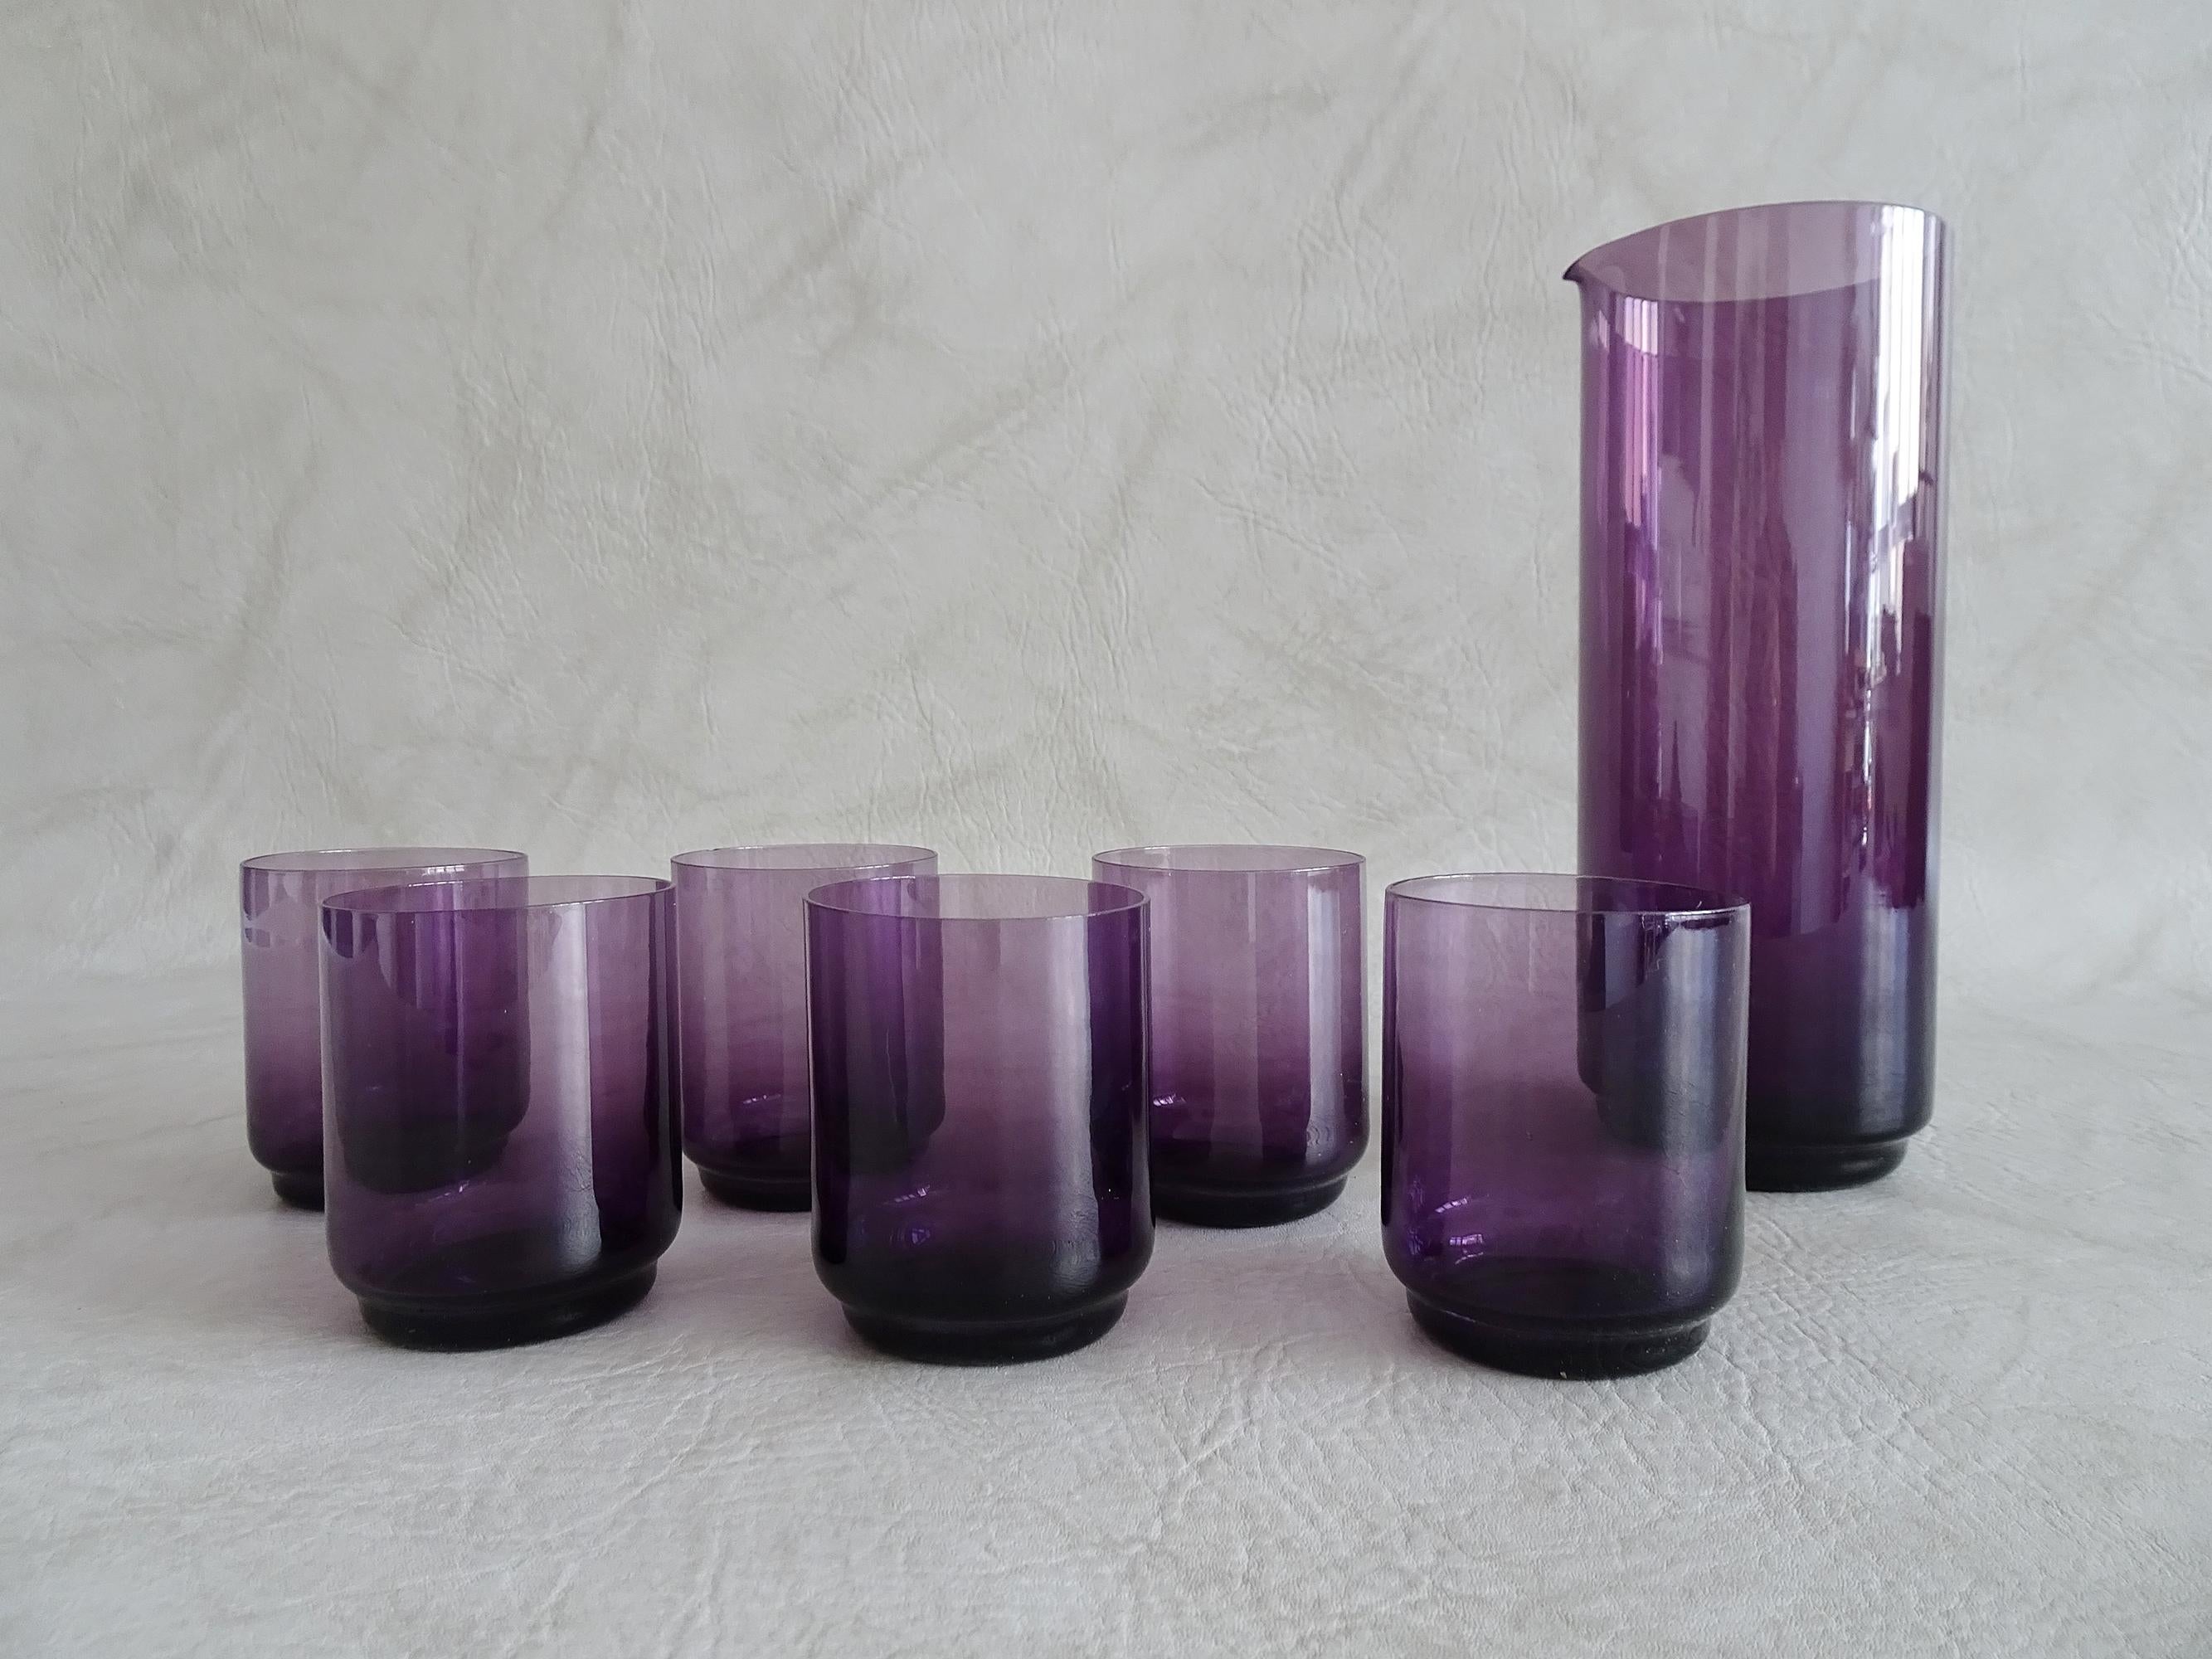 Seven-piece glasses set, consisting of a carafe and six glasses. Clear and elegant, thin glass, hand-blown in purple from the mid-century. The minimalist design convinces immediately and is a great companion for daily needs and a decorative